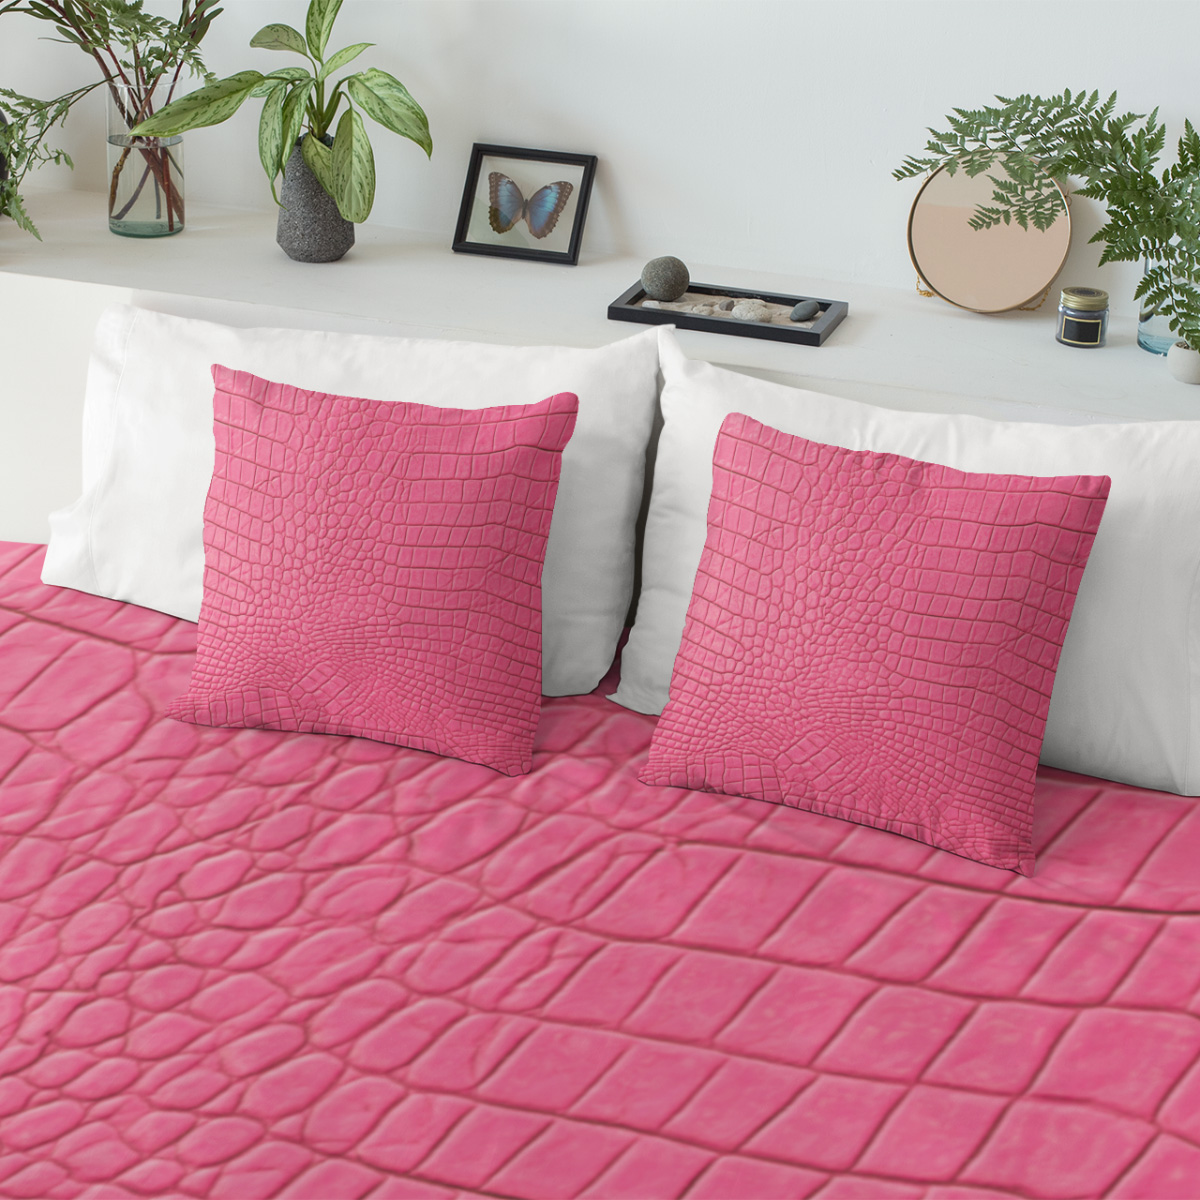 duvet-cover-mockup-of-a-bed-with-two-square-pillows-31238